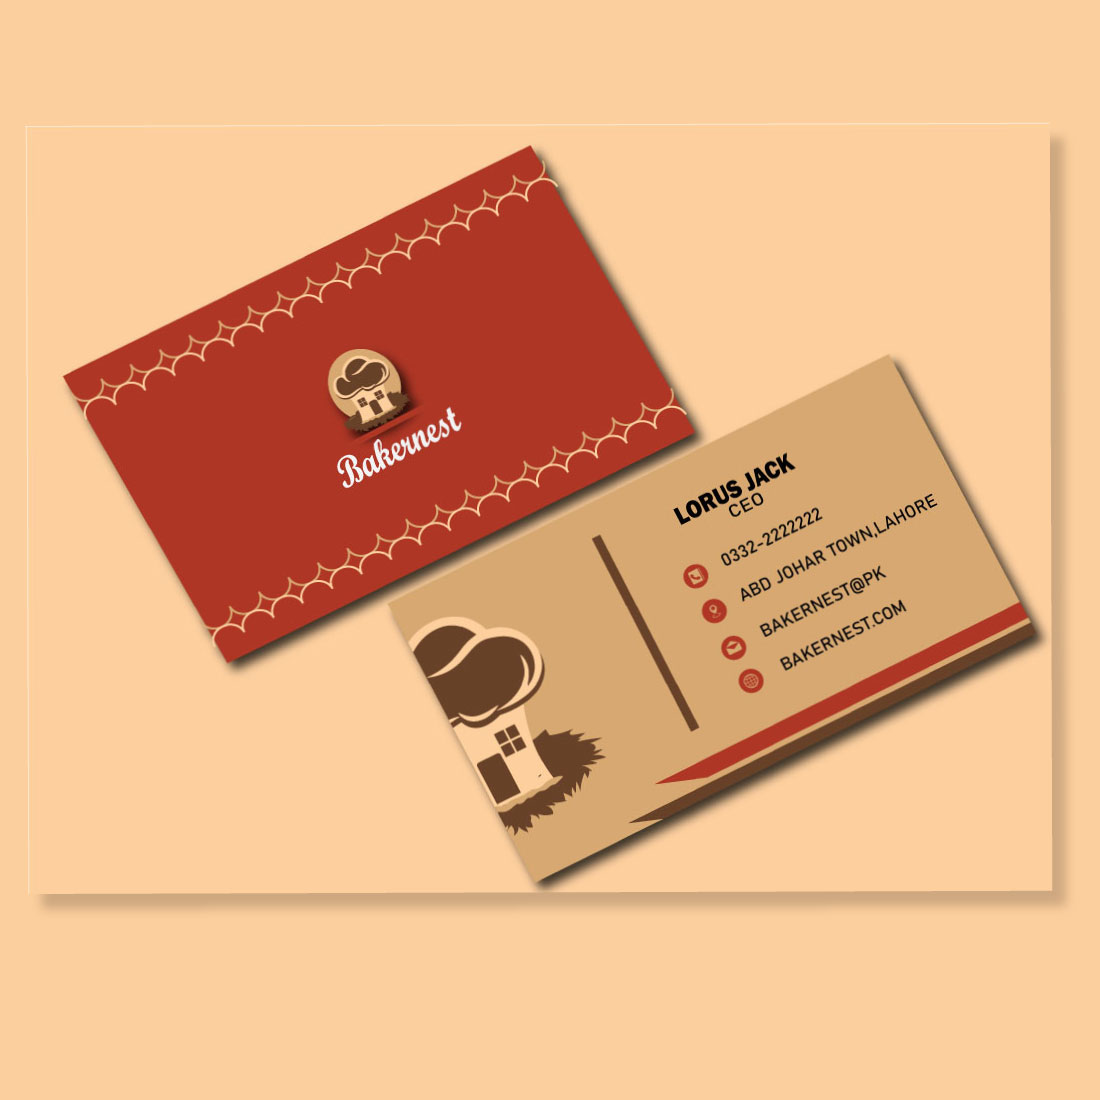 Bakernest Double Sided Business Card image cover.